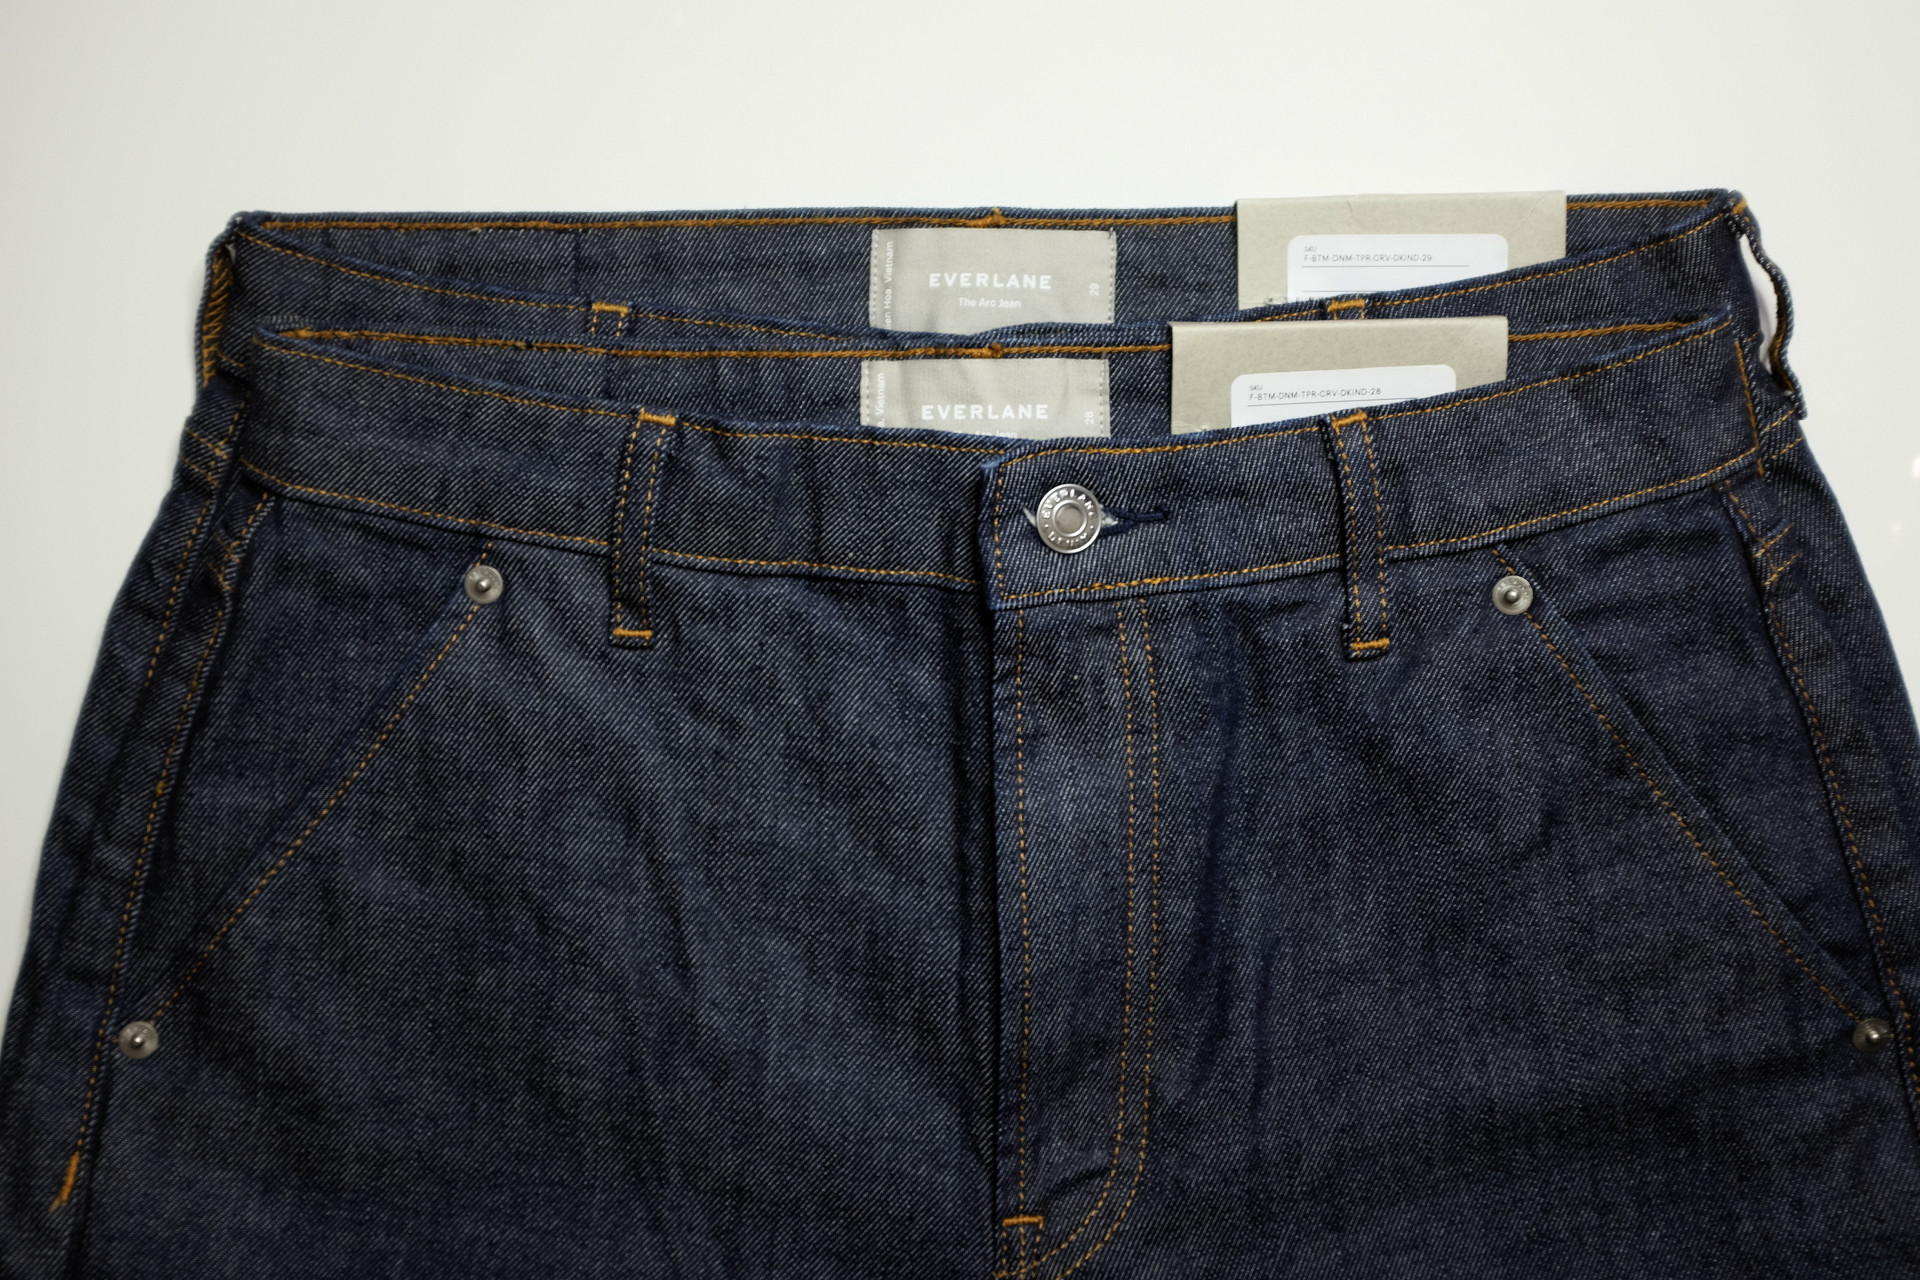 Two pairs of jeans stacked; the smaller size is barely smaller than the larger size